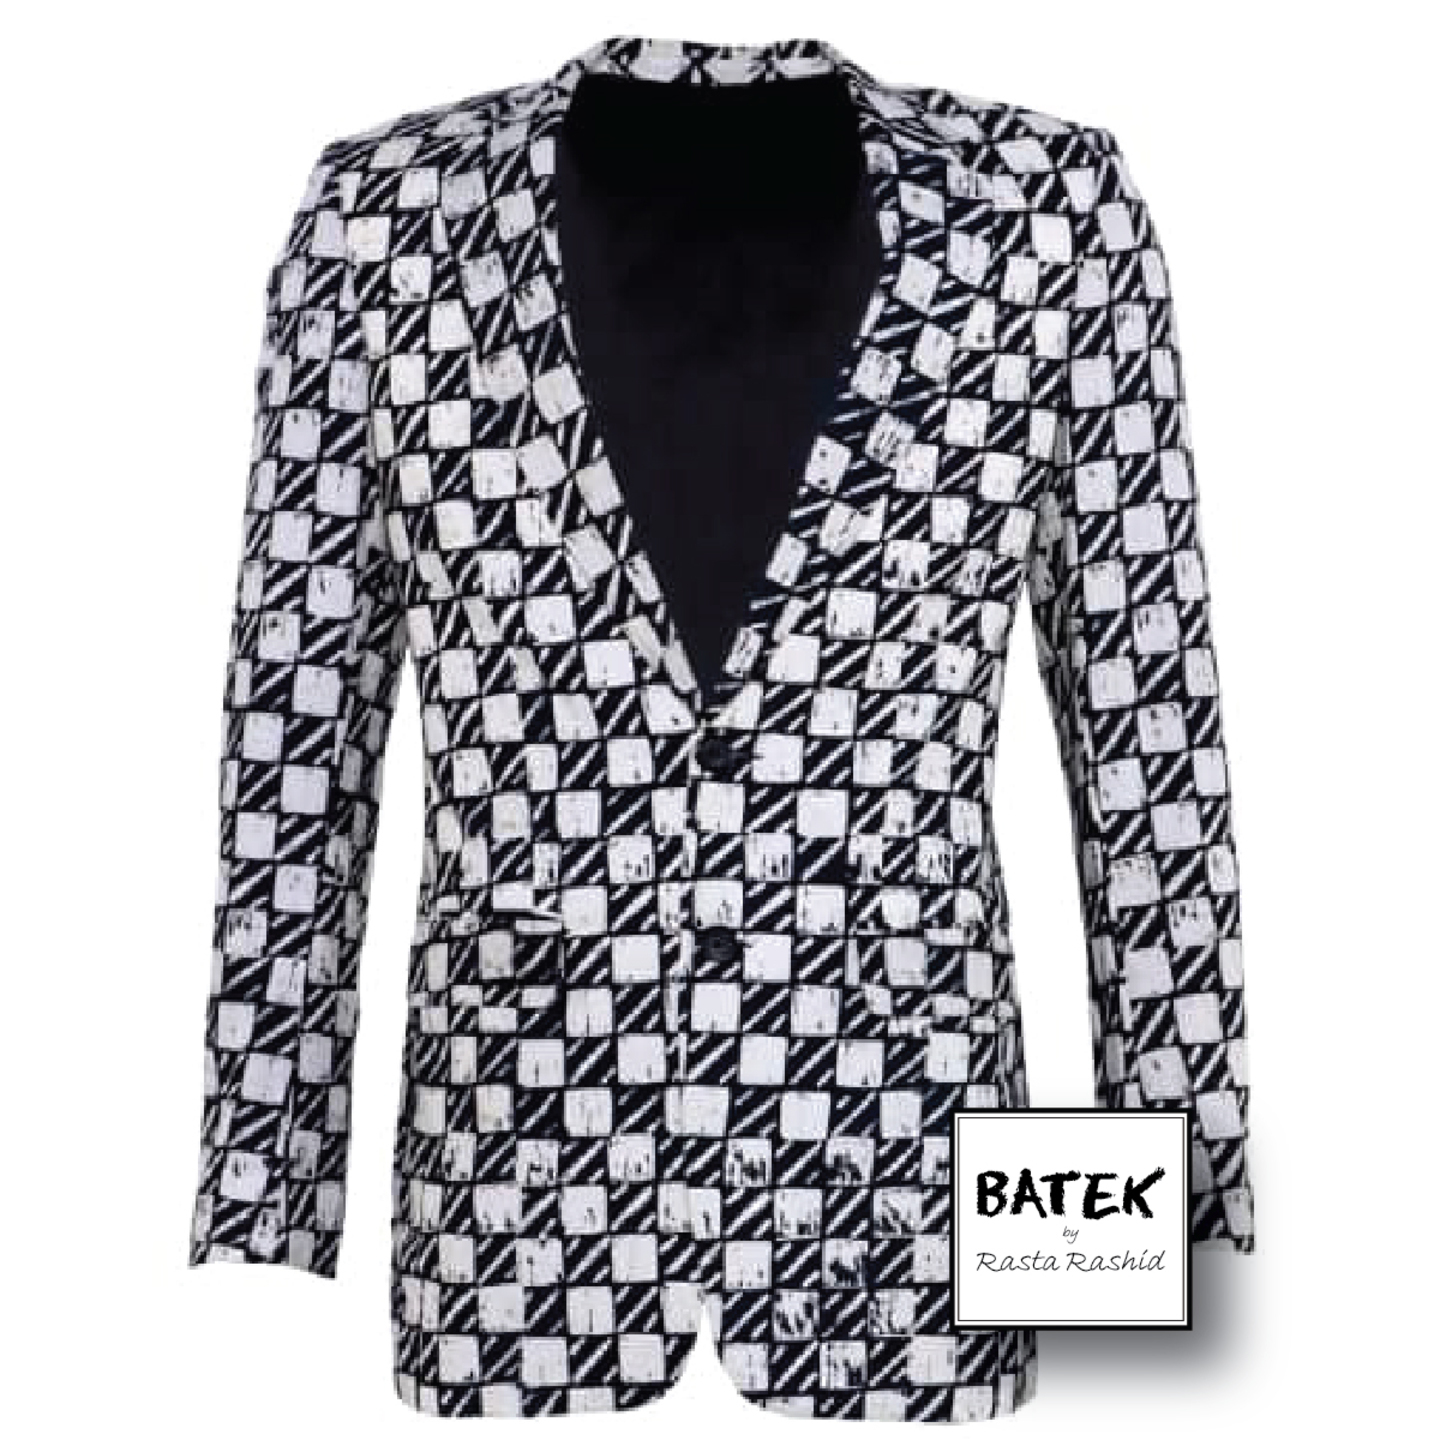 MEN'S JACKET SINGLE BREASTED - FM02 - BLACK AND WHITE